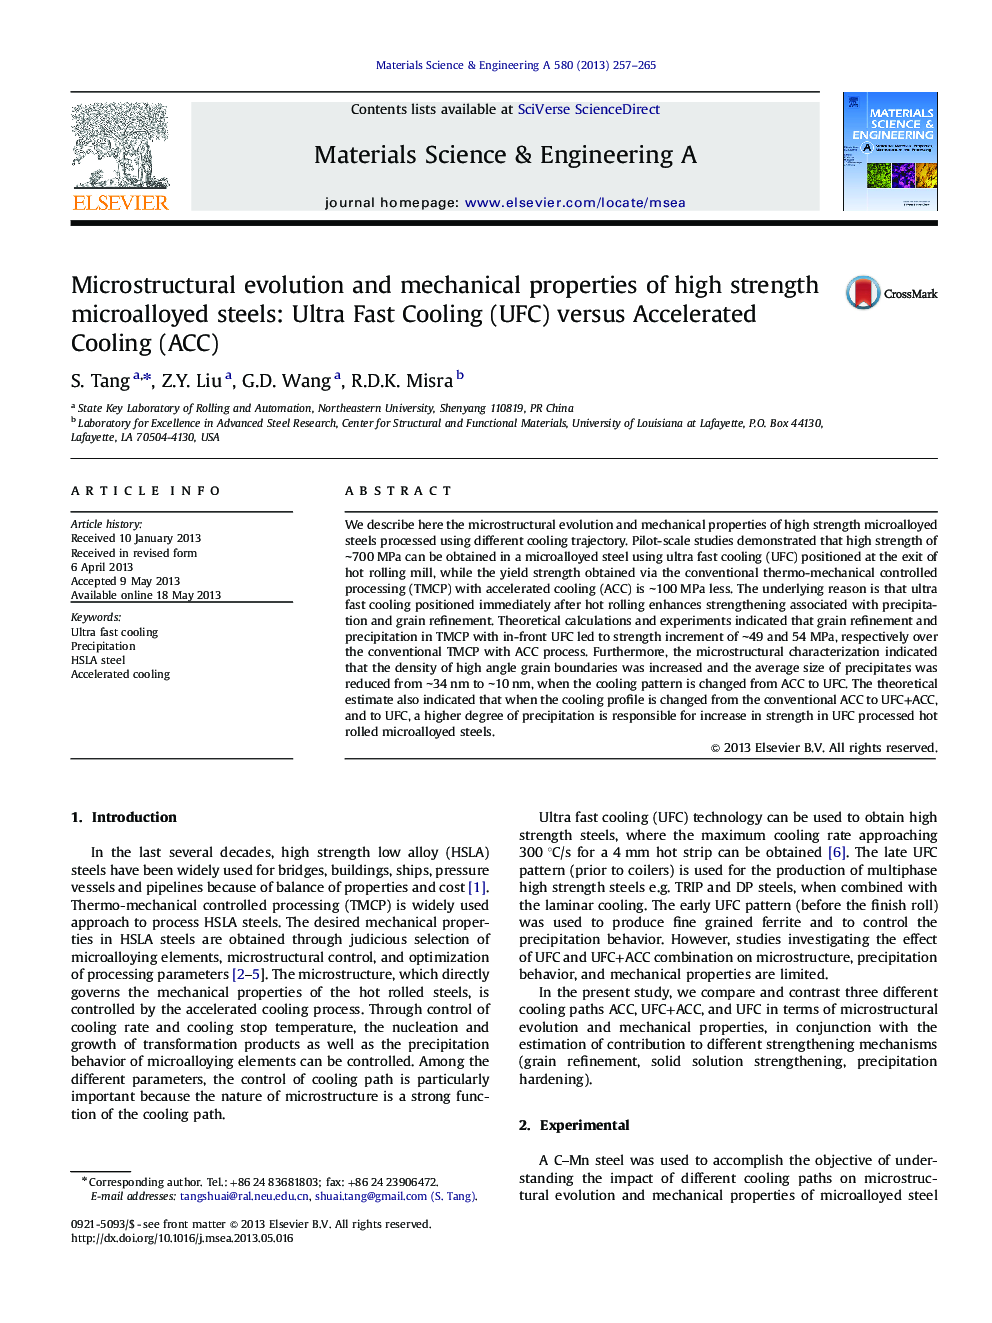 Microstructural evolution and mechanical properties of high strength microalloyed steels: Ultra Fast Cooling (UFC) versus Accelerated Cooling (ACC)